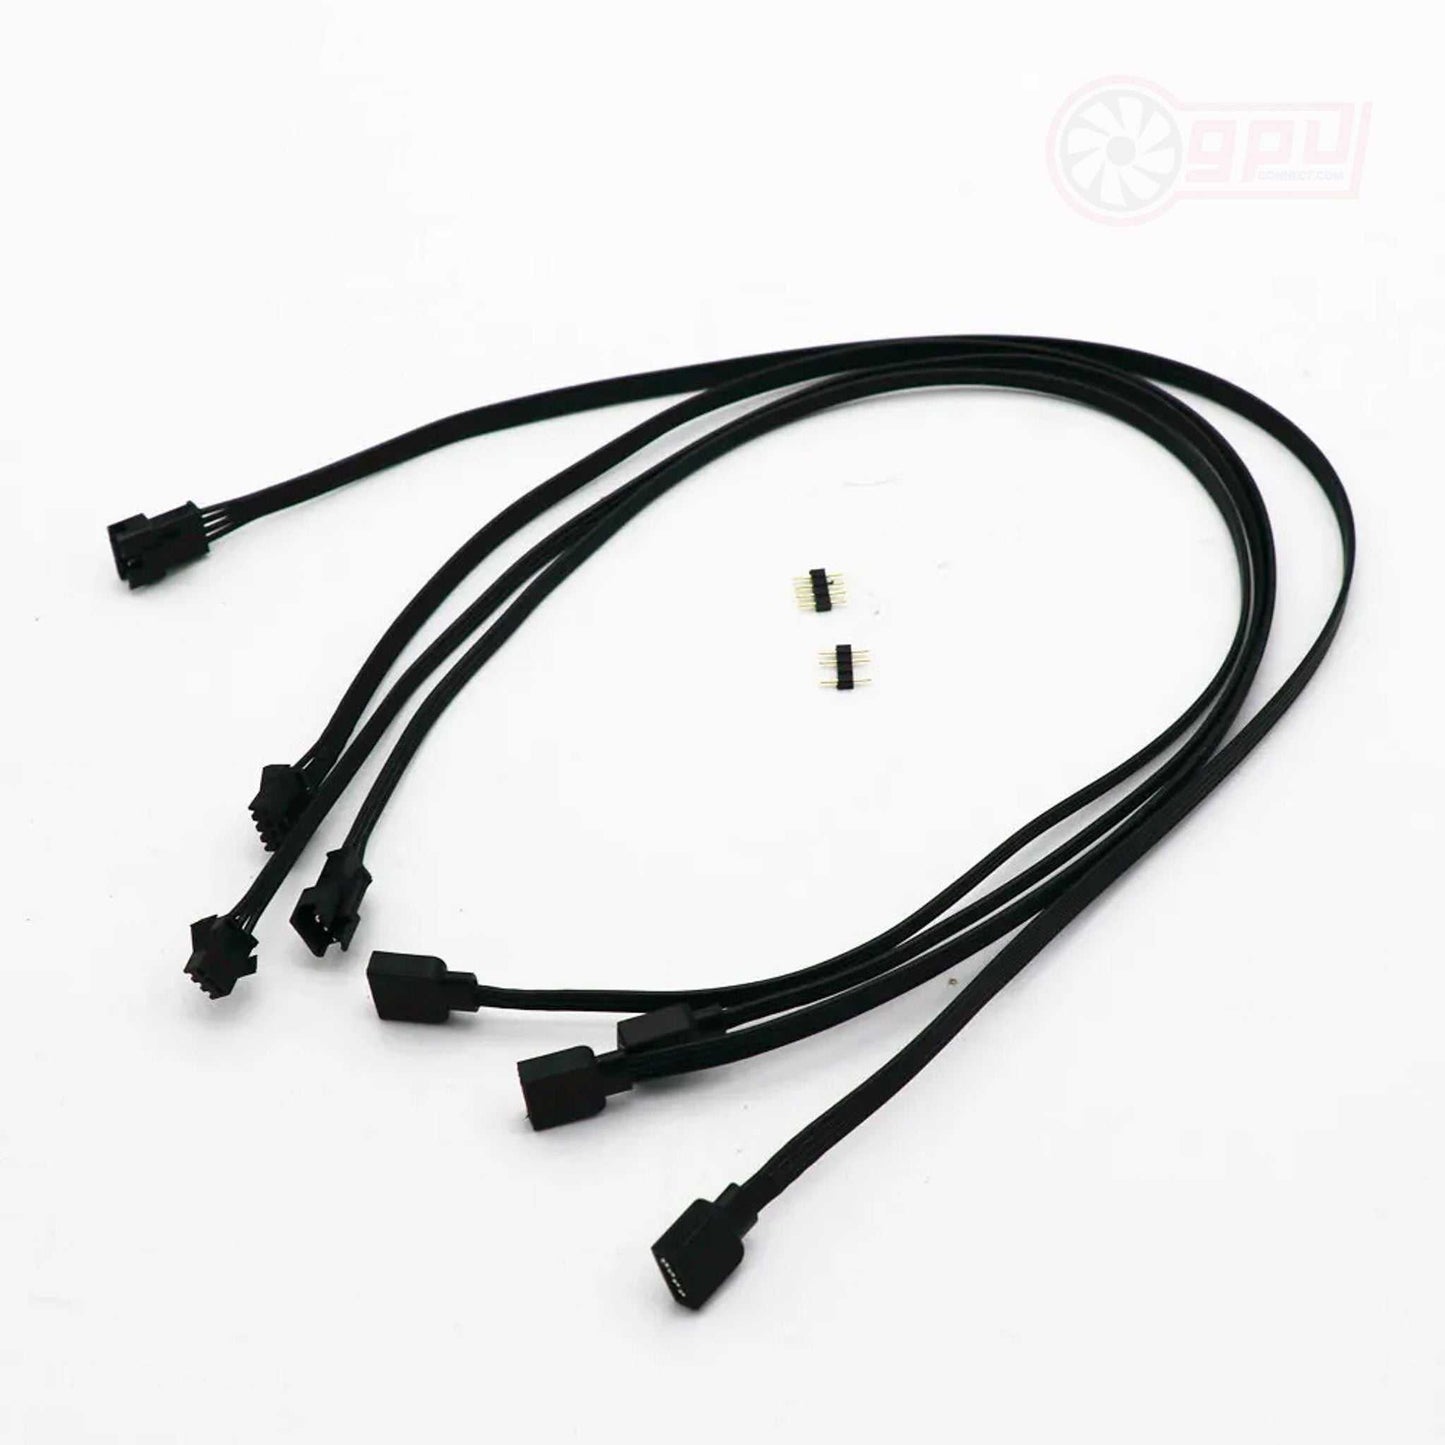 GPUCONNECT 3-Pin 5V / 4-Pin 12V RGB ARGB Control Extension Adapter Cable - GPUCONNECT.COM